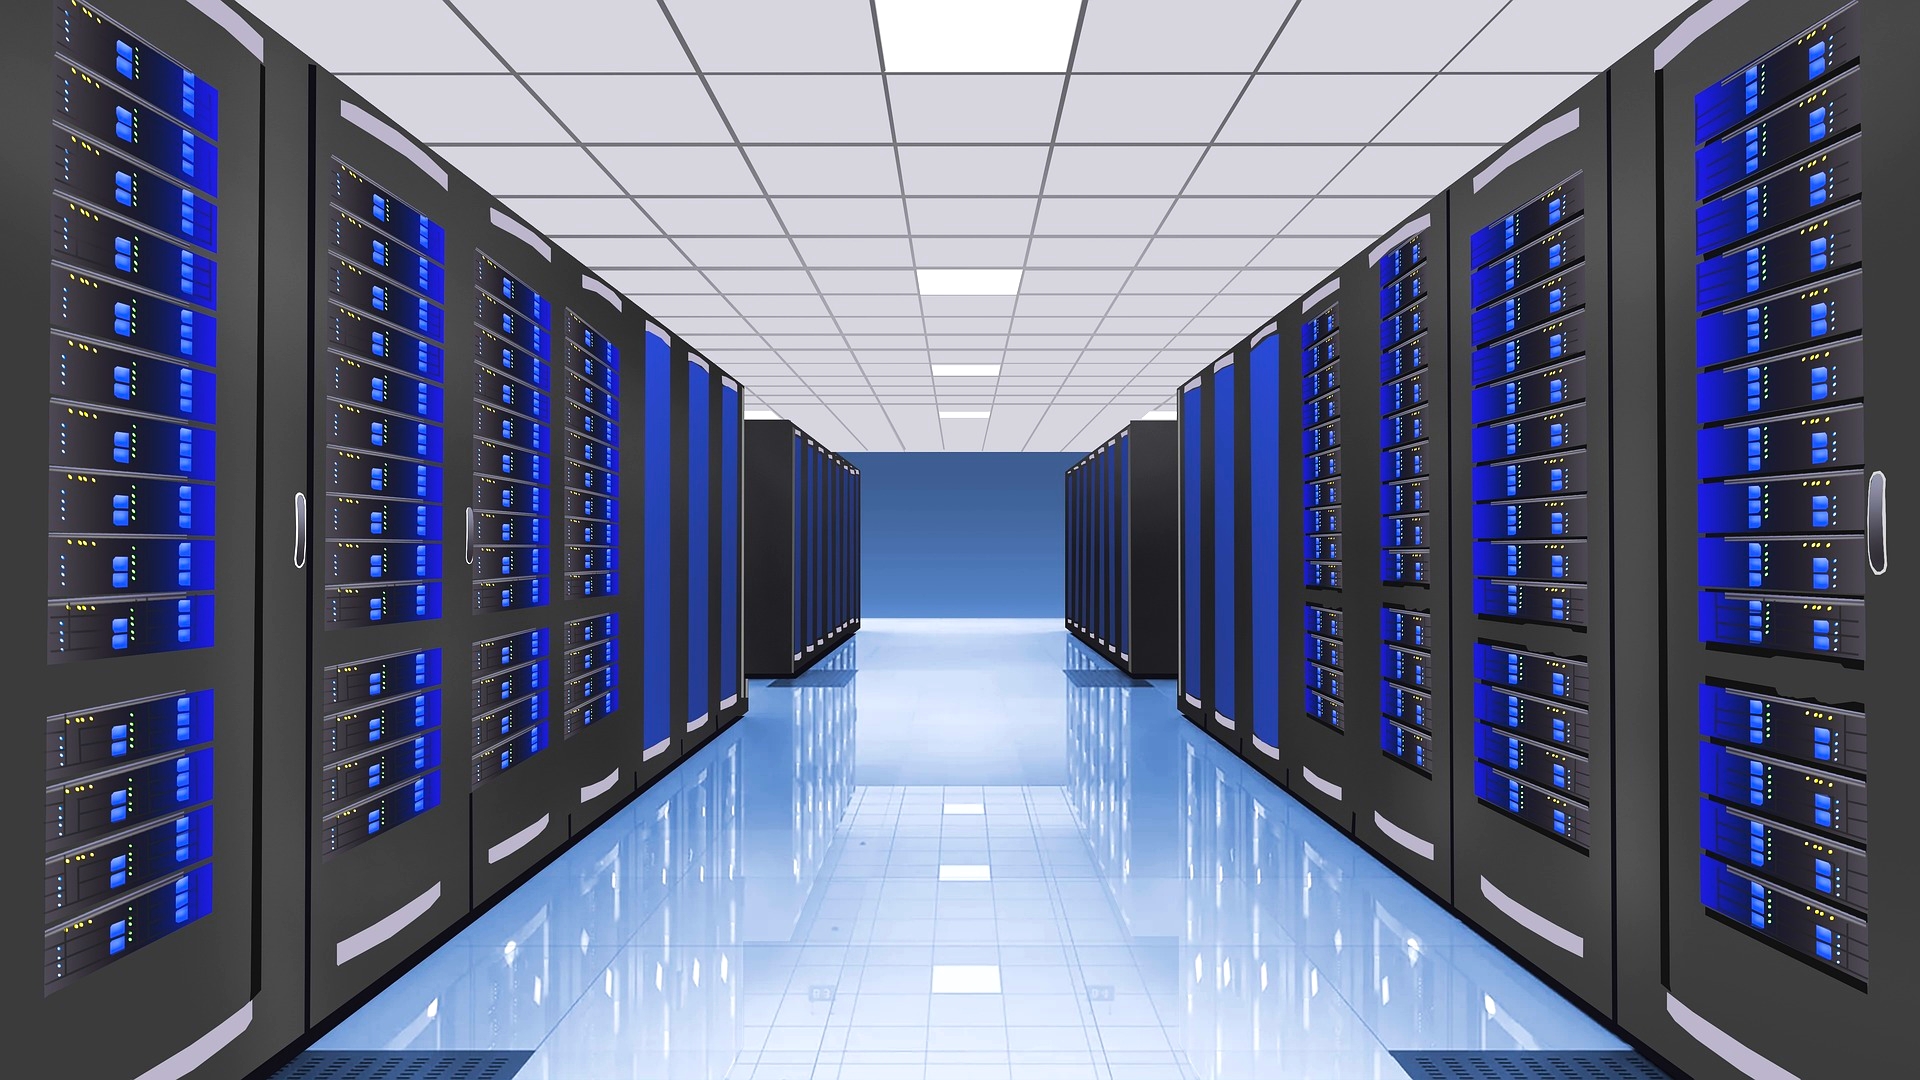 How are Data Centers Cooled